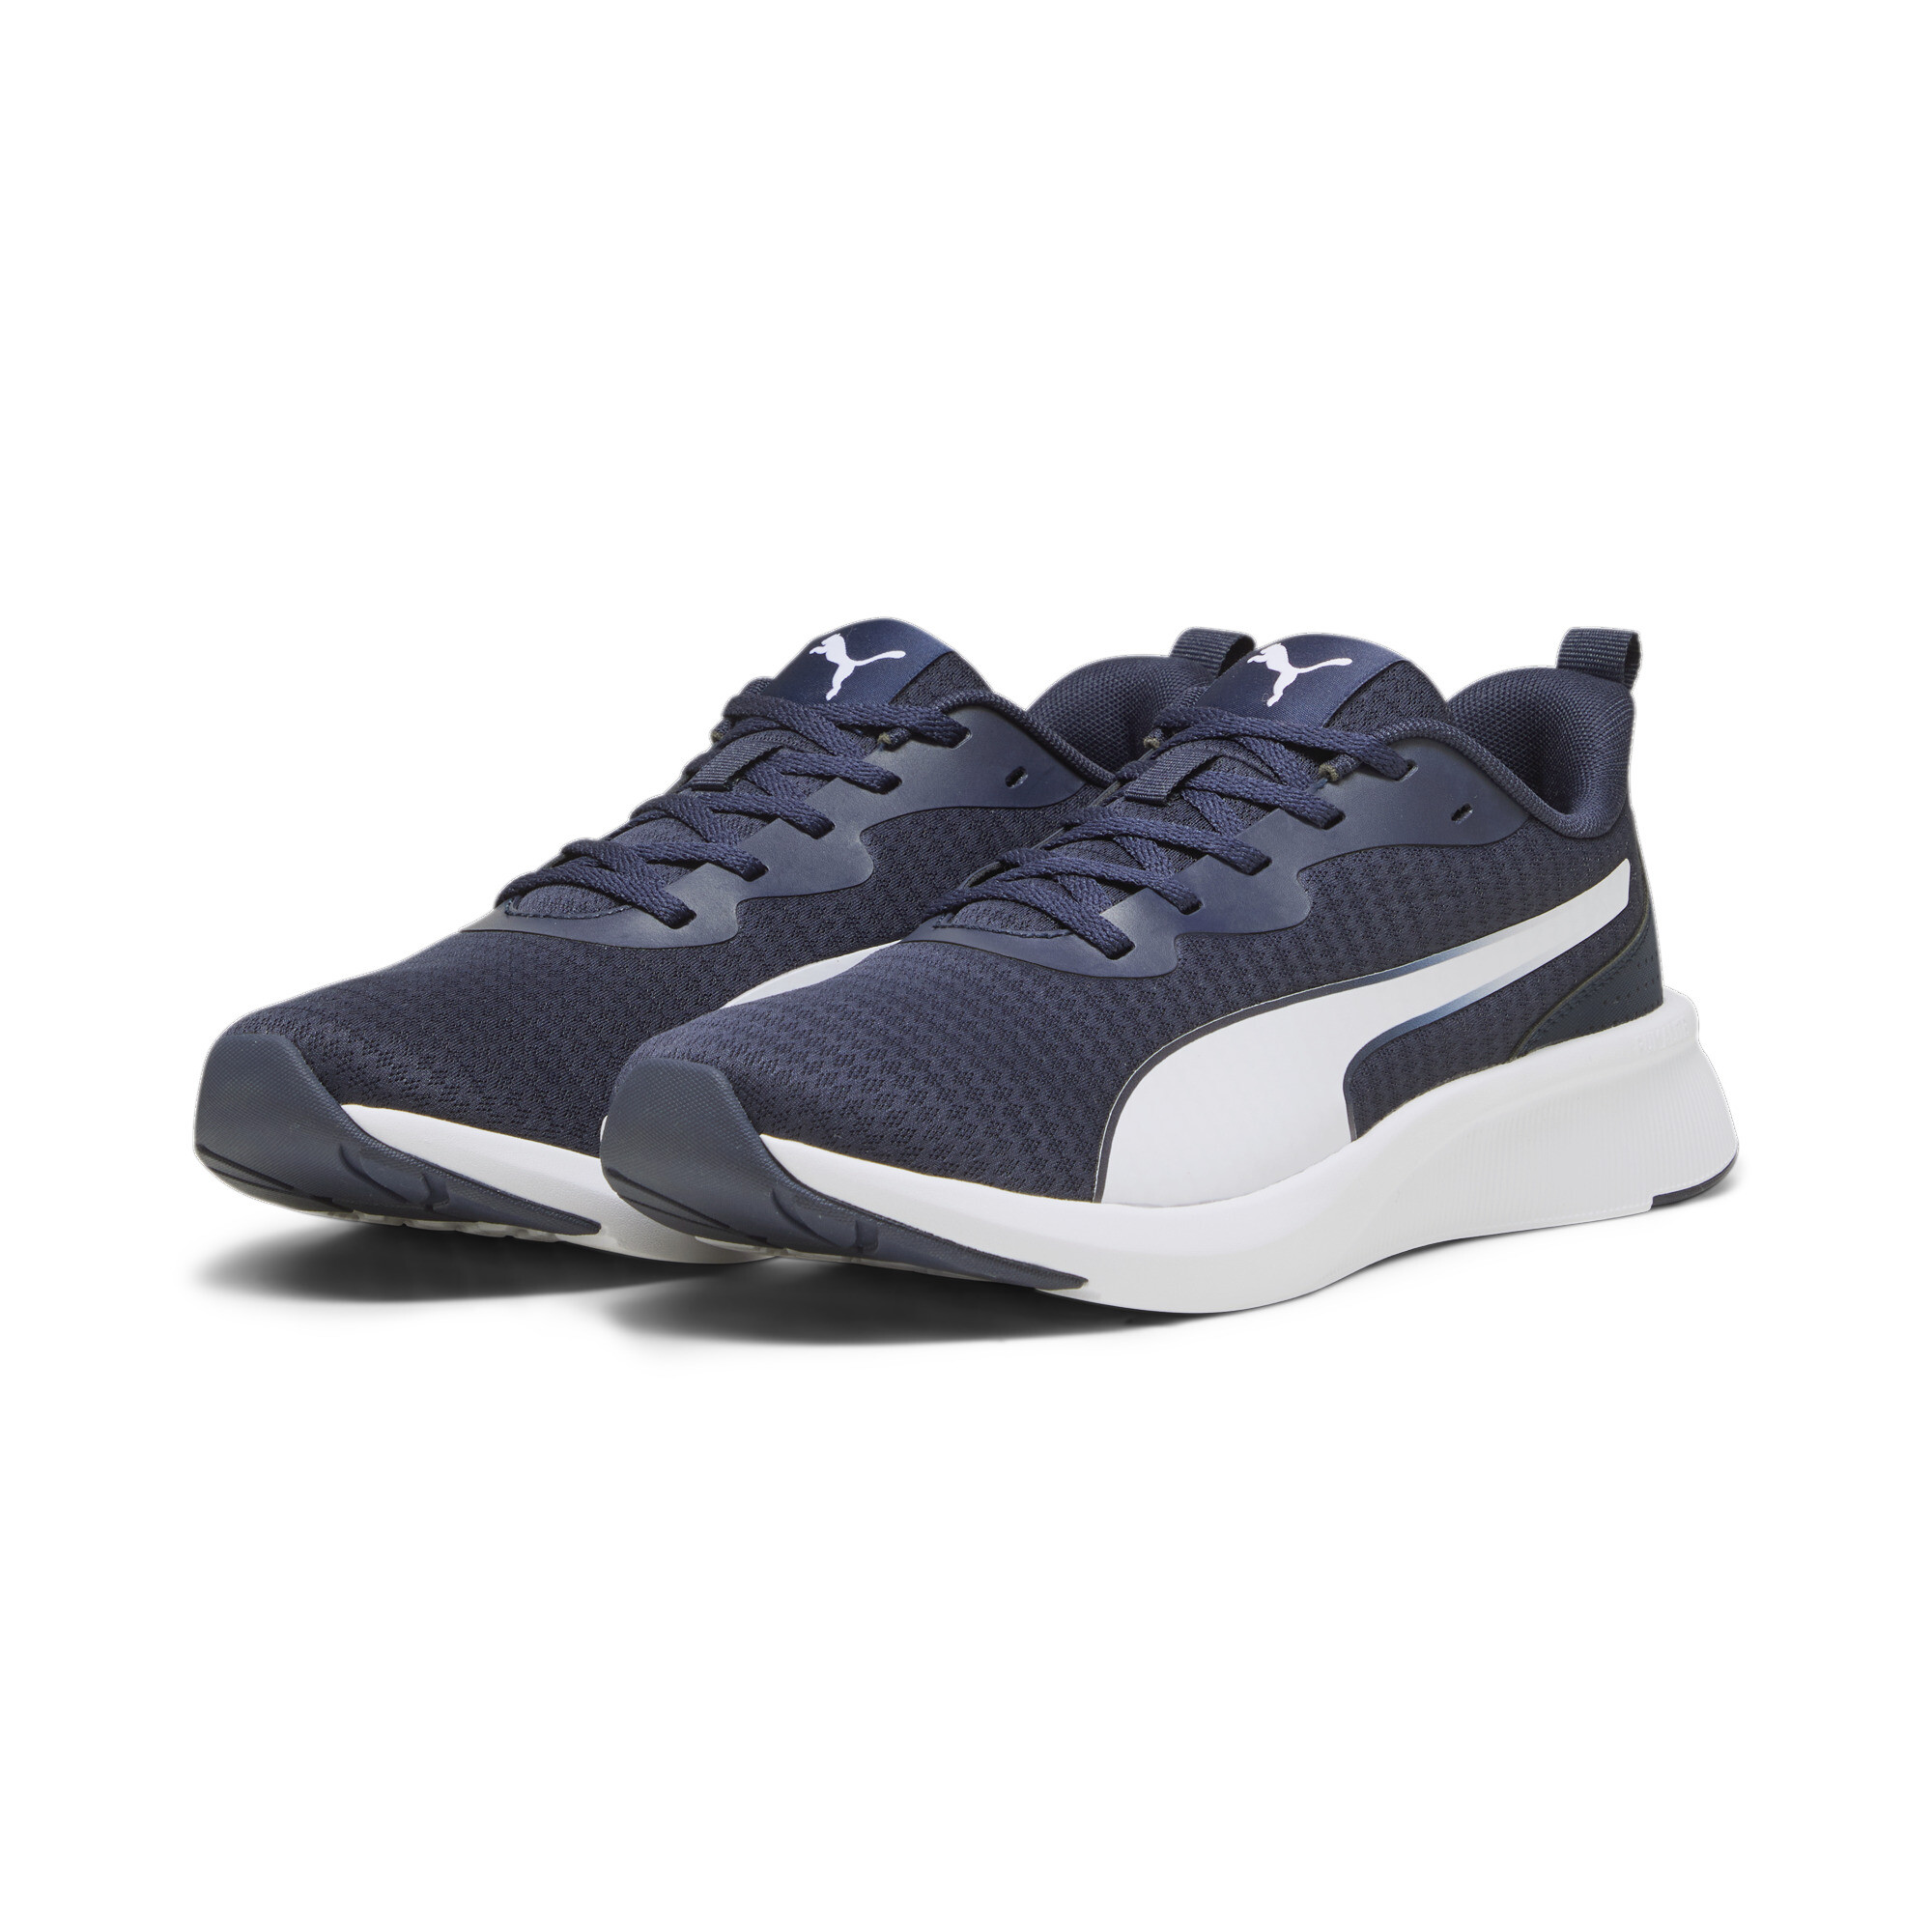 Puma Flyer Lite Running Shoes, Blue, Size 42, Shoes